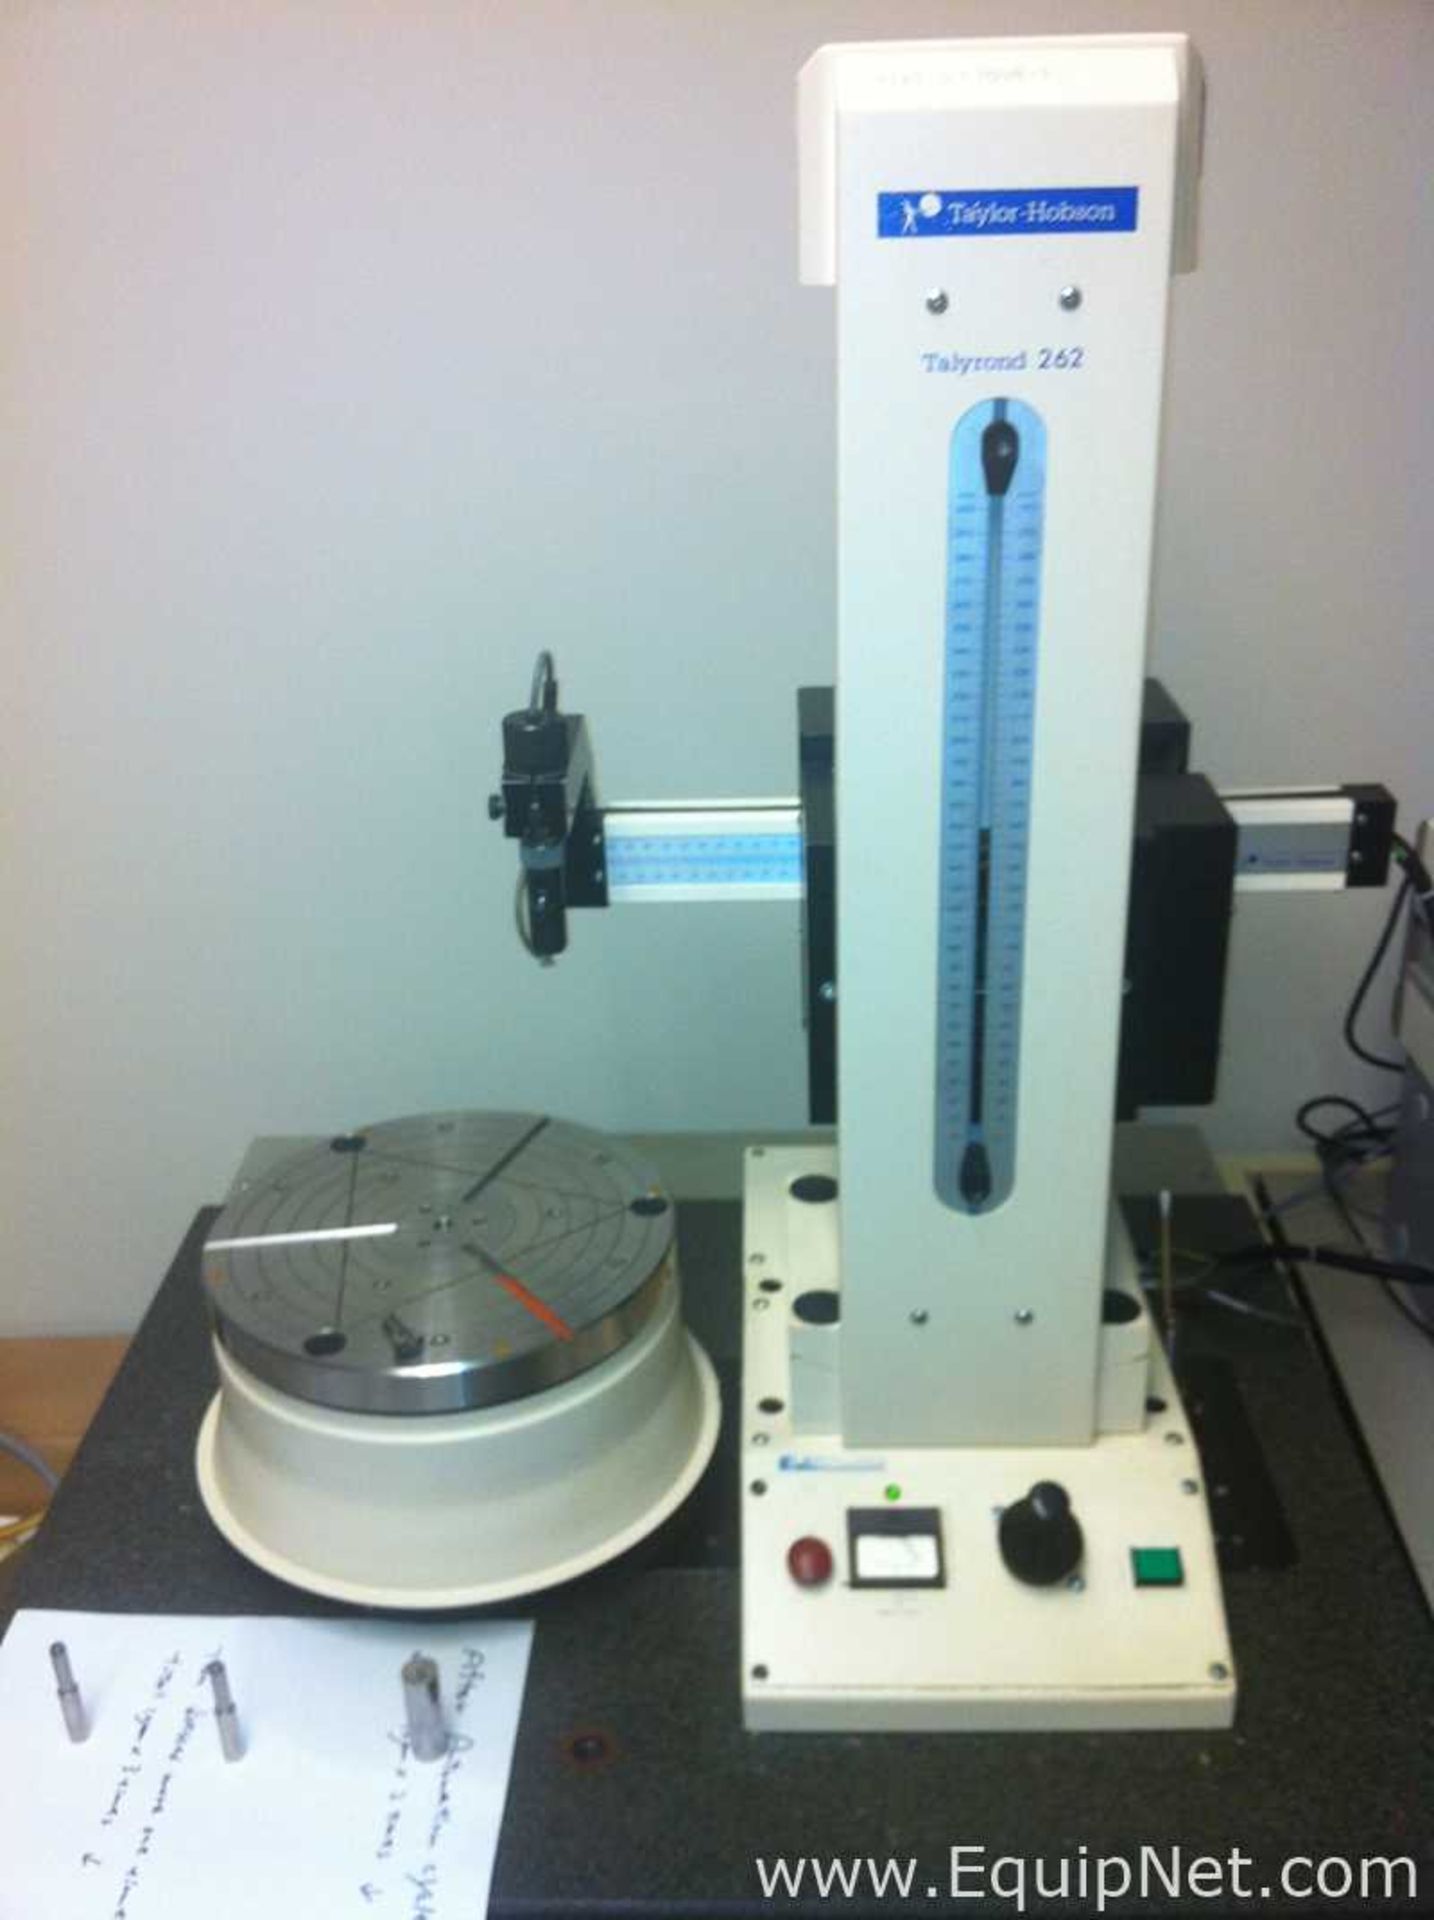 Taylor Hobson Talyrond 262 Roundness And Cylindricity Analyzer - Image 2 of 5